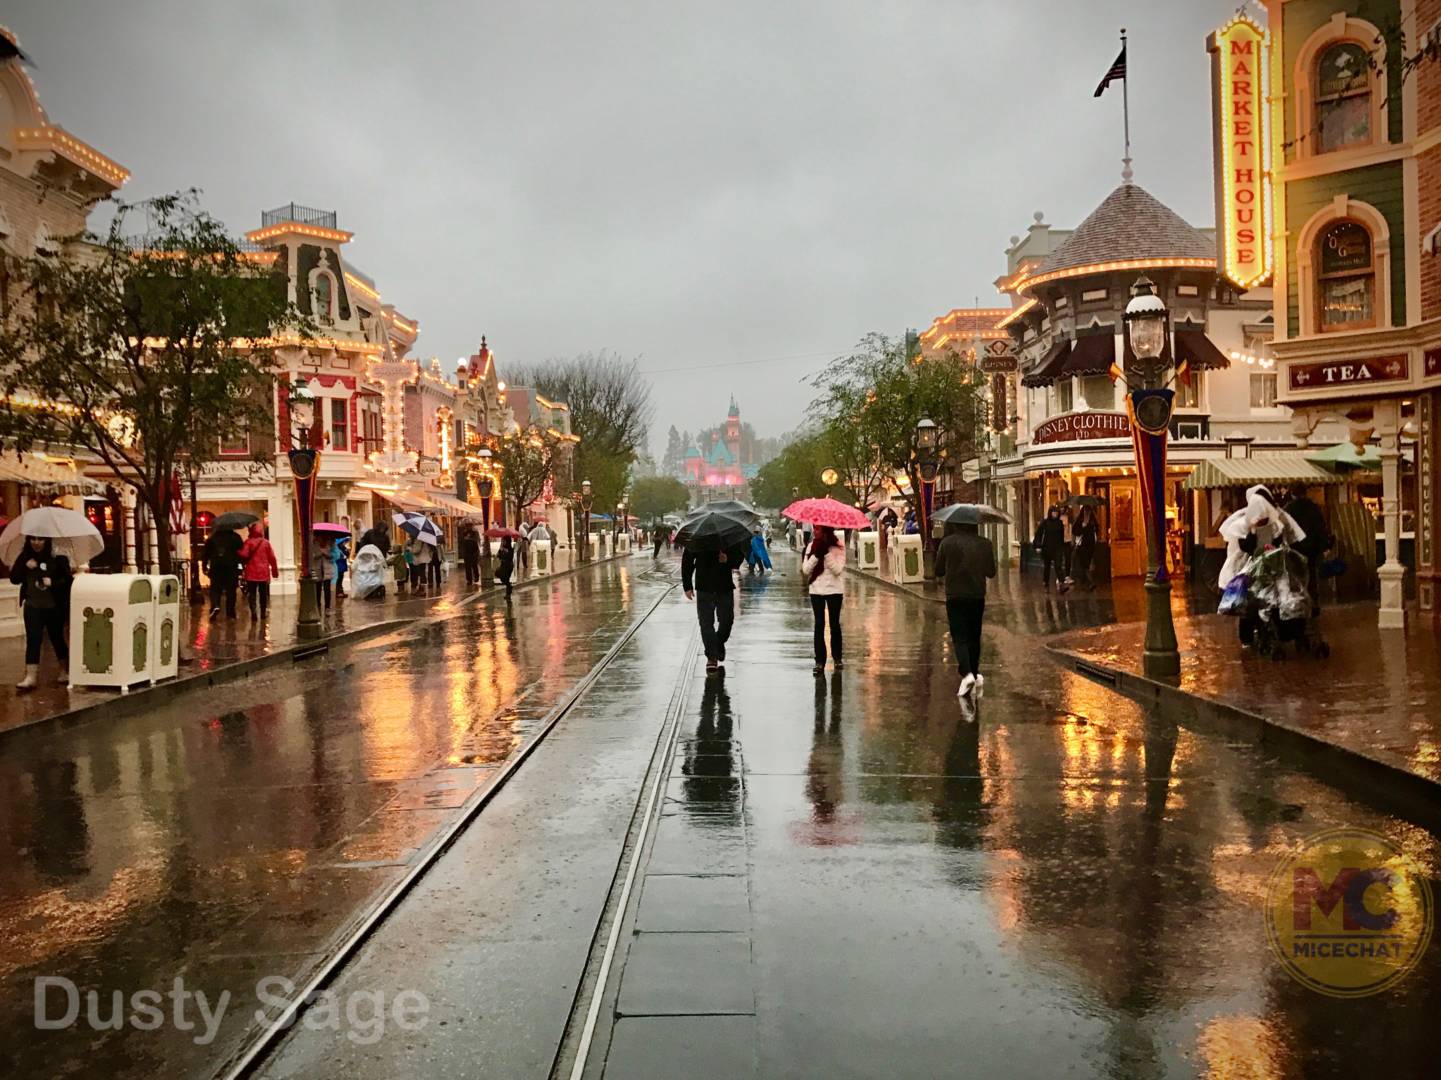 , Five Things I Miss Most About Disneyland While Trapped at Home